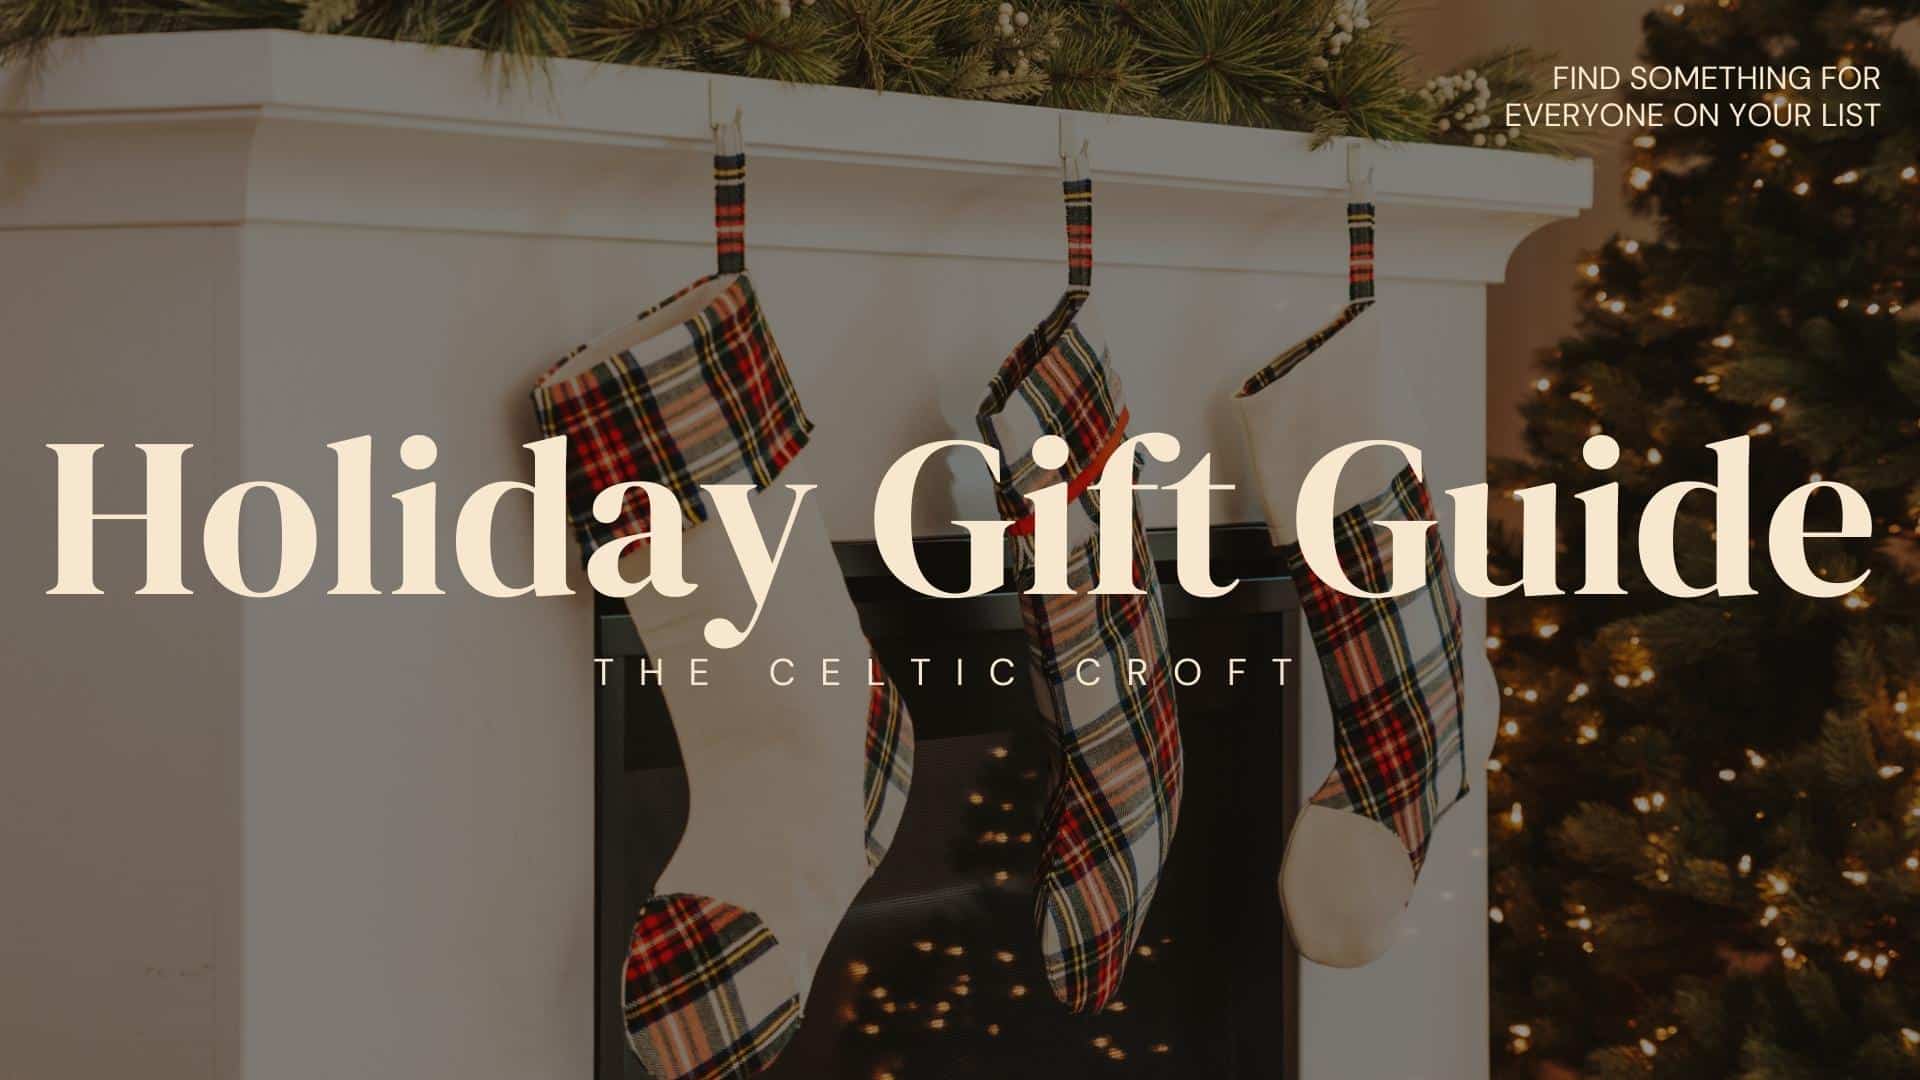 The Celtic Croft 2022 Holiday Gift Guide PAGE 1